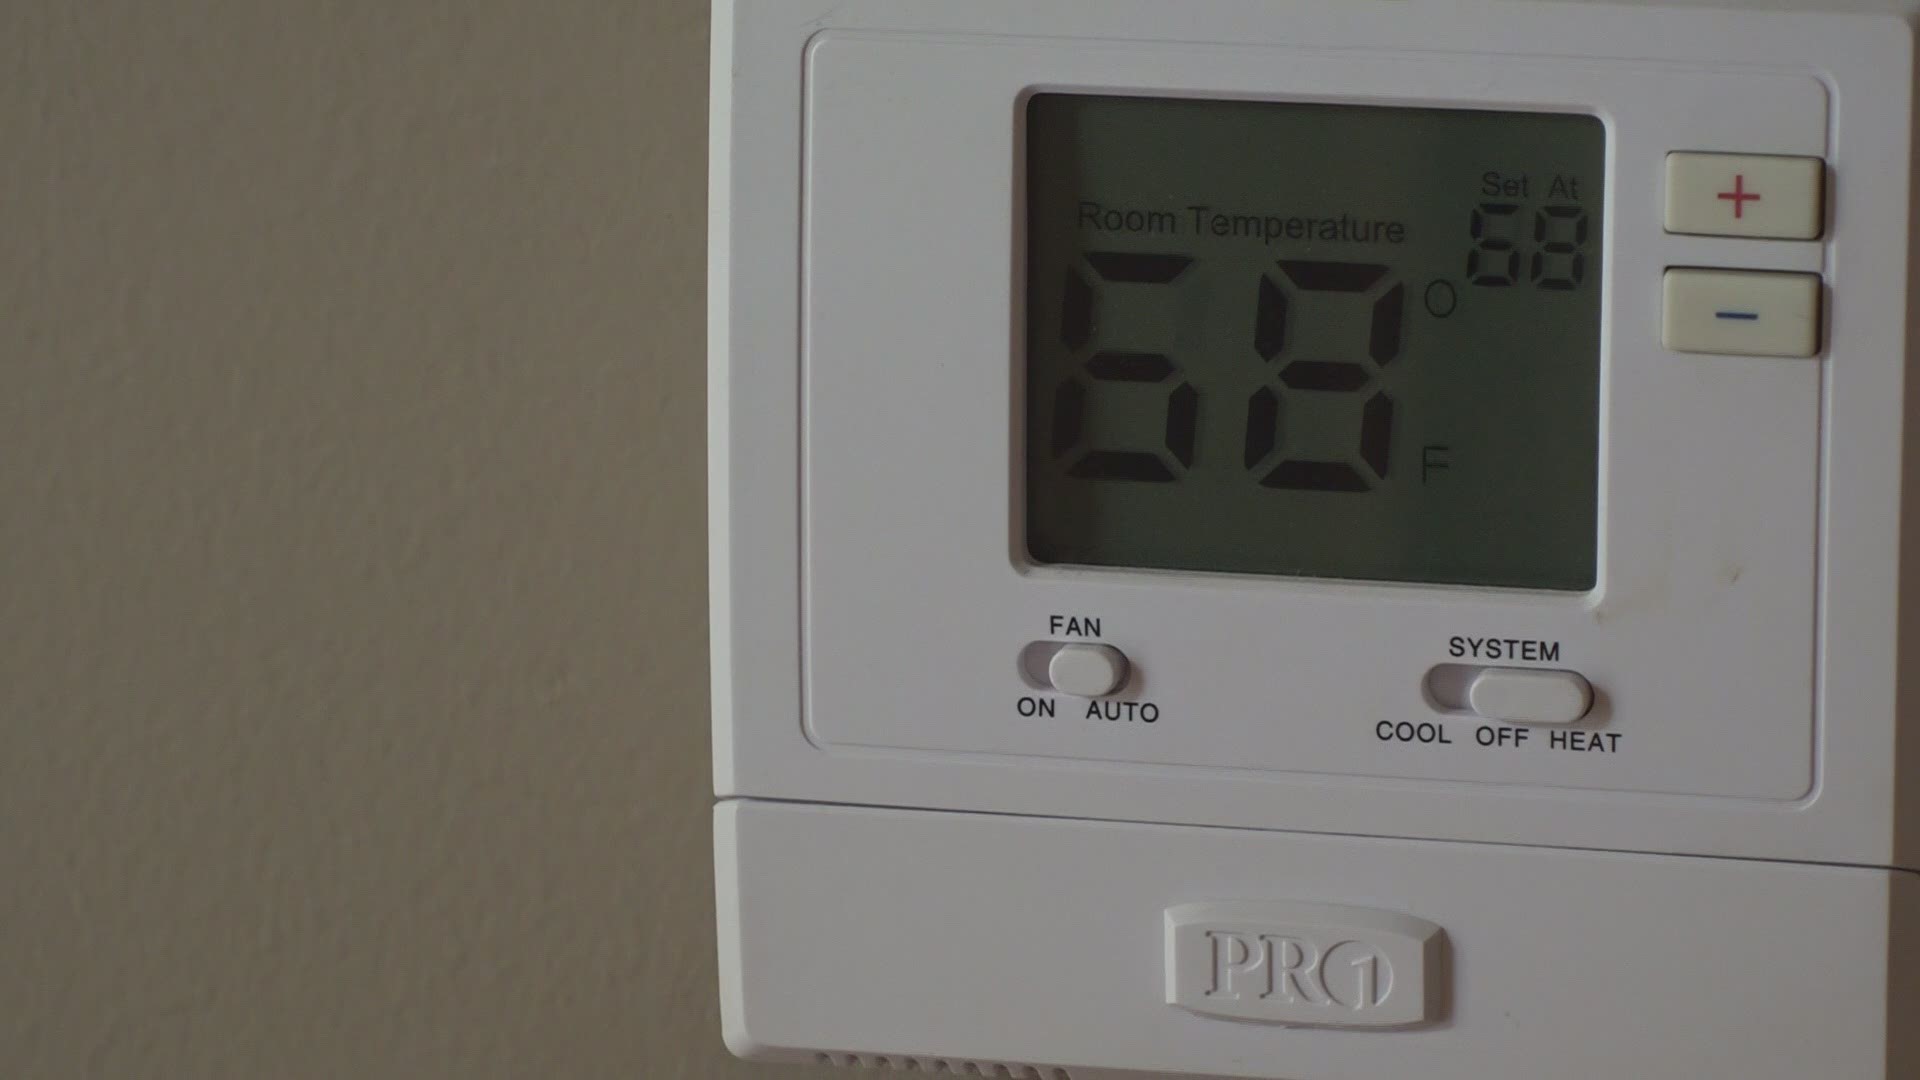 Danny Monteverde has some tips on what you can do to conserve energy and stay warm during the freeze.